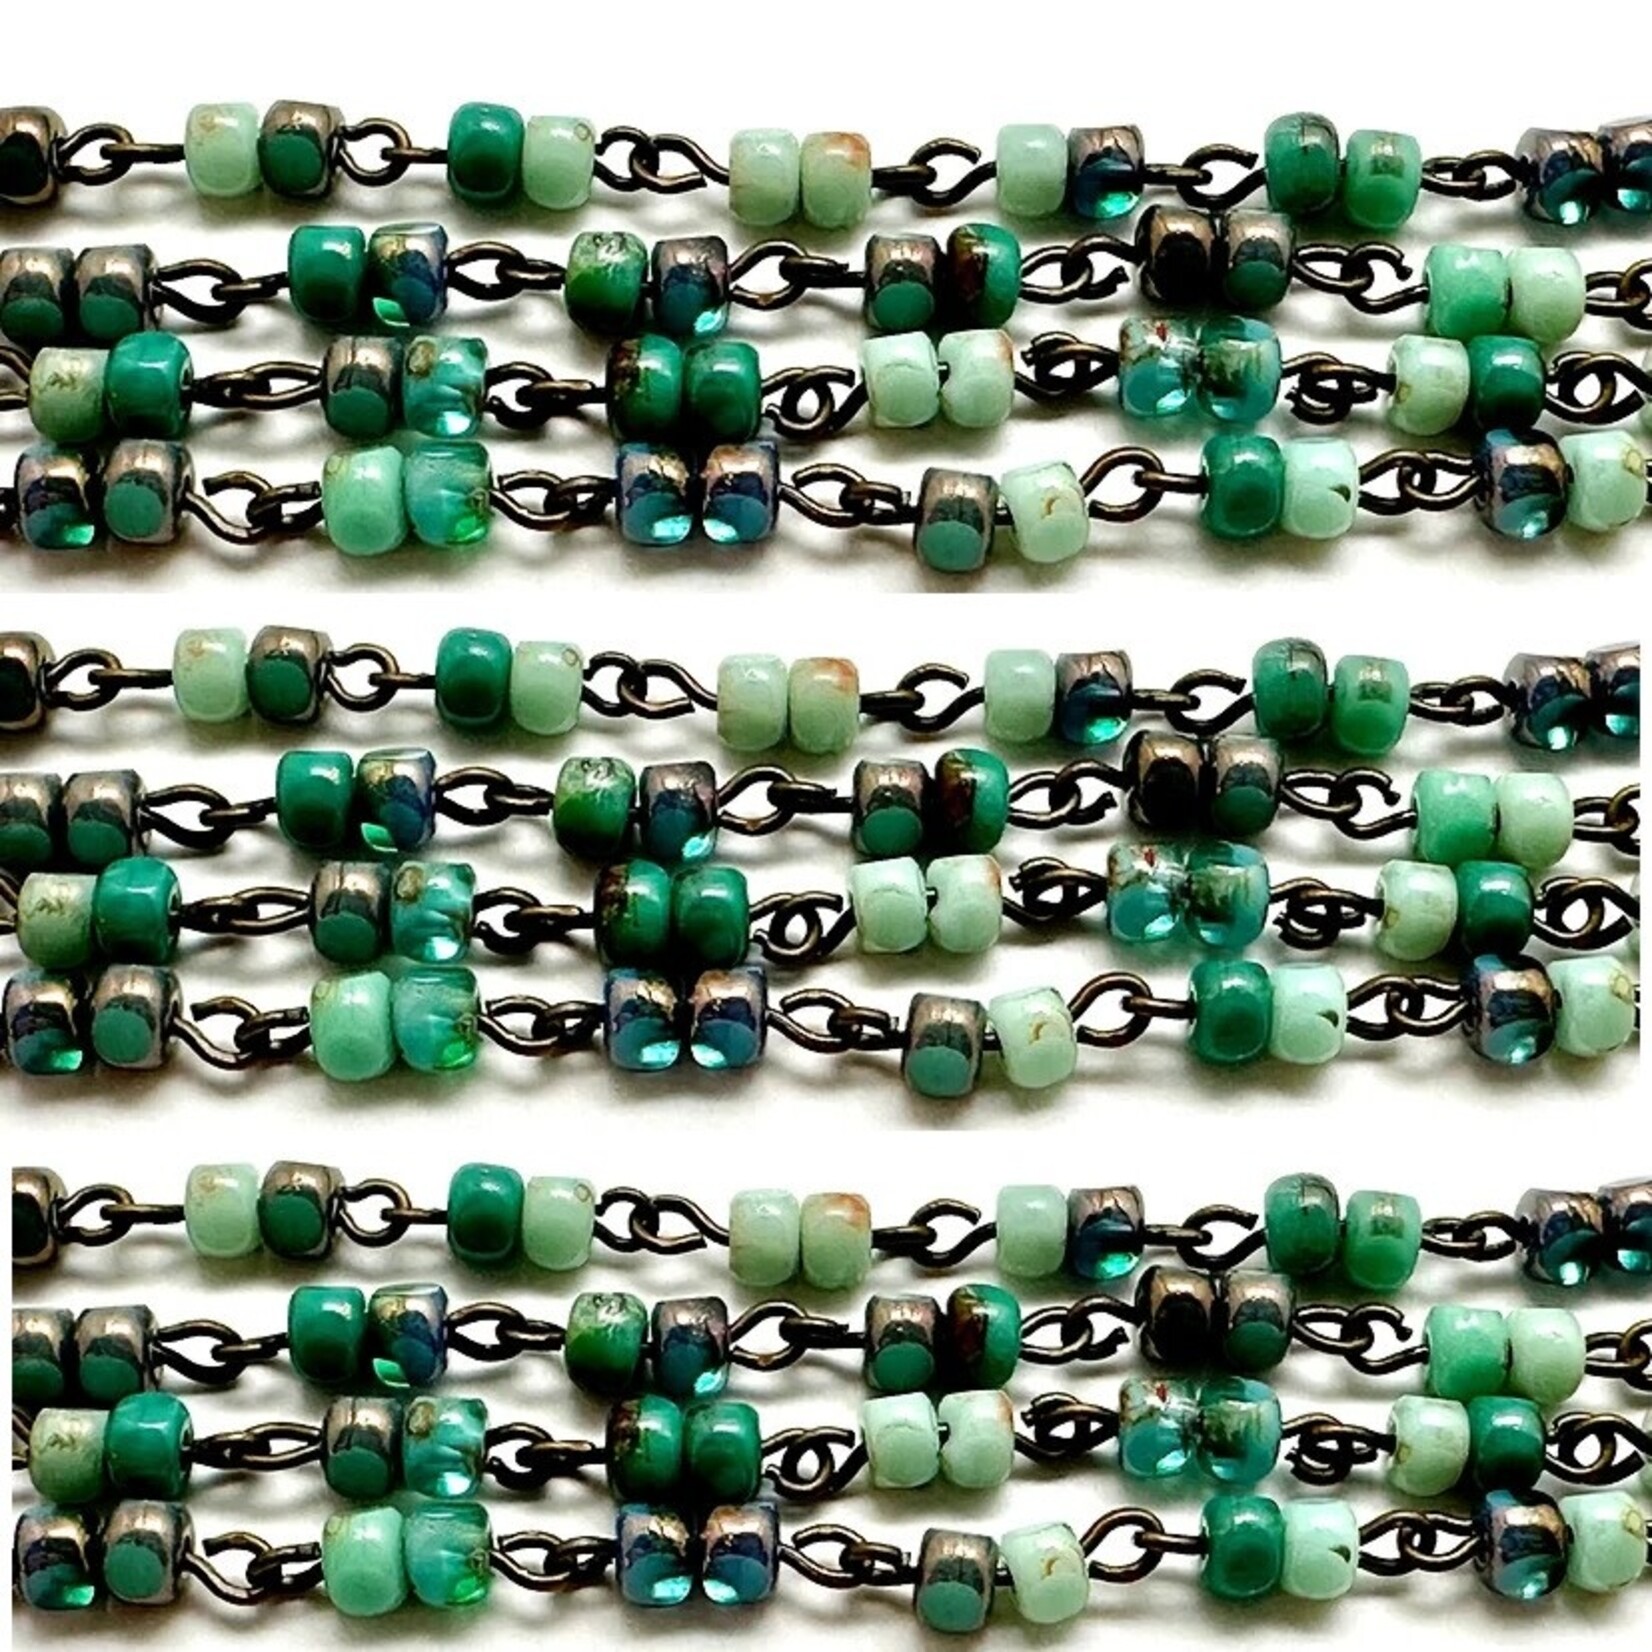 Czech Glass Beaded Chain Tri-cut Turquoise w/ Antique Brass - 1 Foot